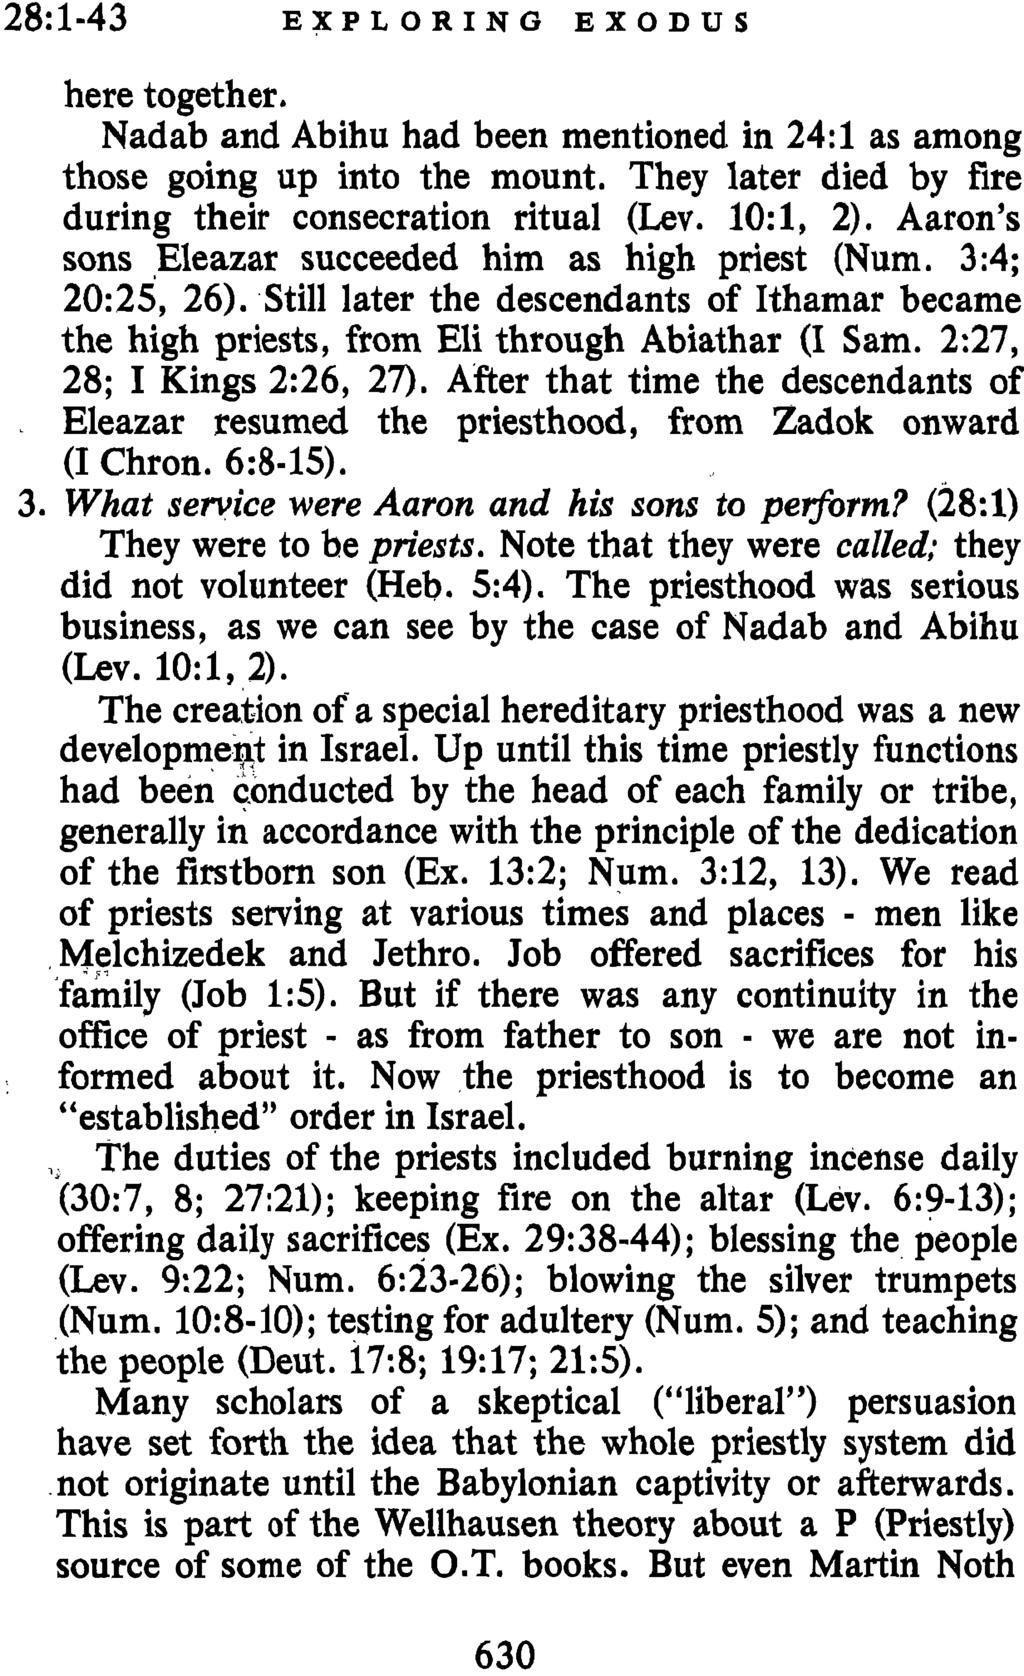 28~1-43 EXPLORING EXODUS here together. Nadab and Abihu had been mentioned in 24:1 as among those going up into the mount. They later died by fire during their consecration ritual (Lev. lo:l, 2).